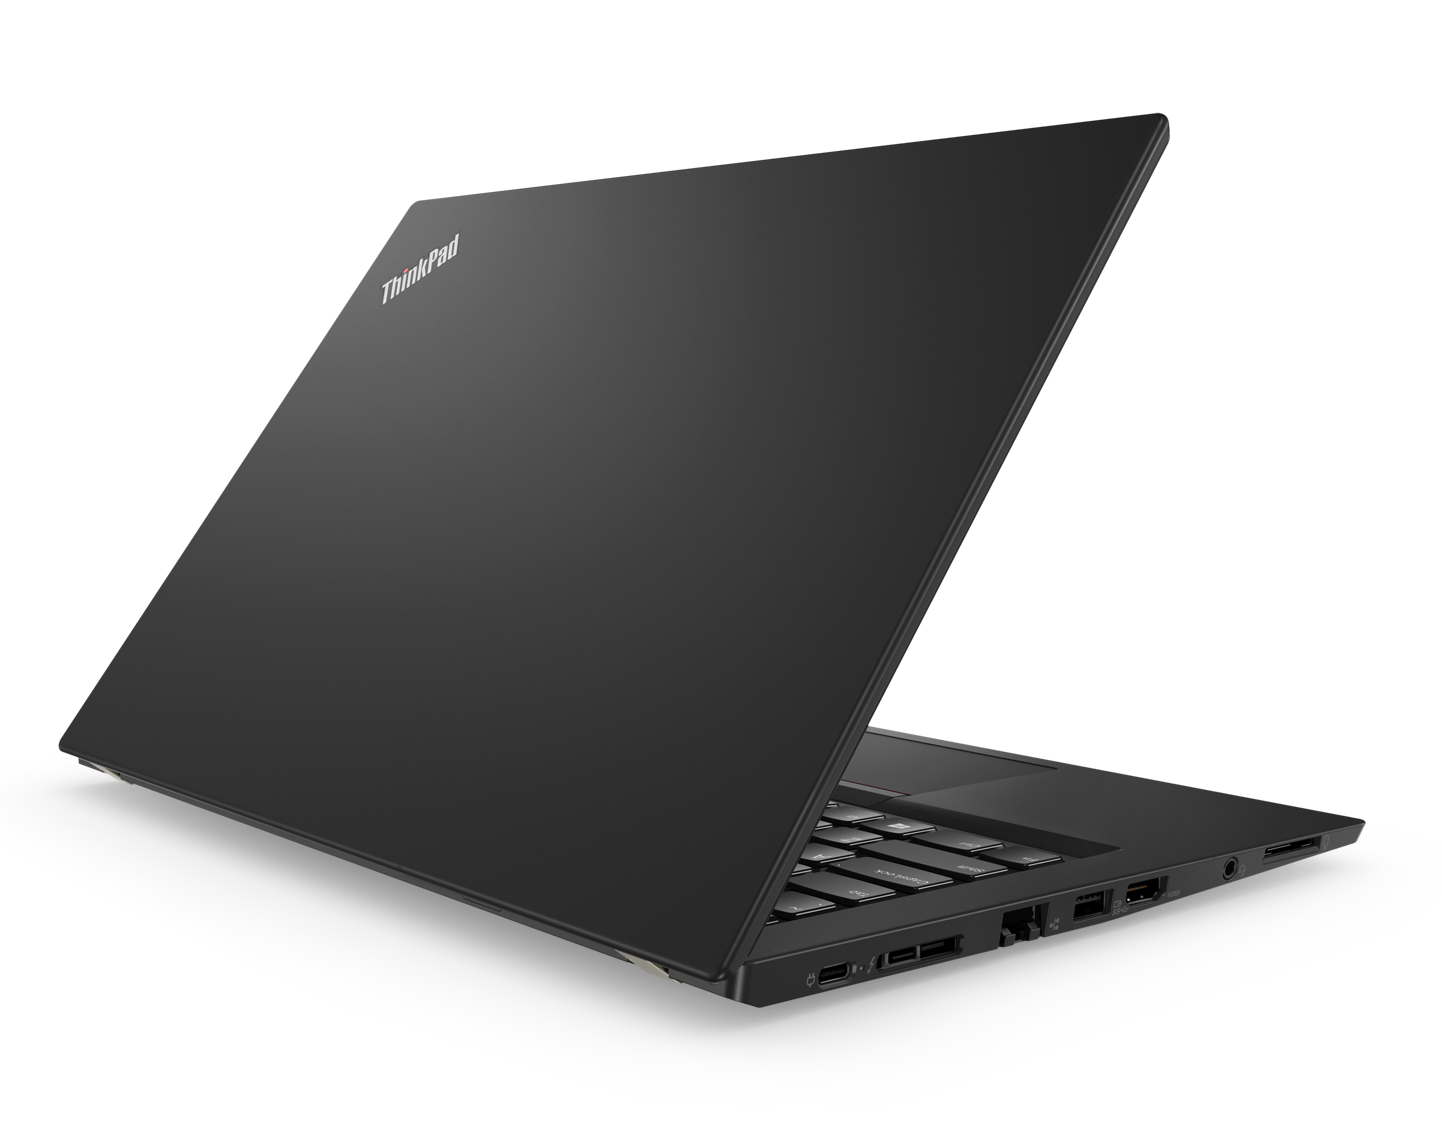 ThinkPad T480s, ThinkPad T480 & ThinkPad T580: Quad Core CPUs and the  GeForce MX150 are coming to the traditional T series   News